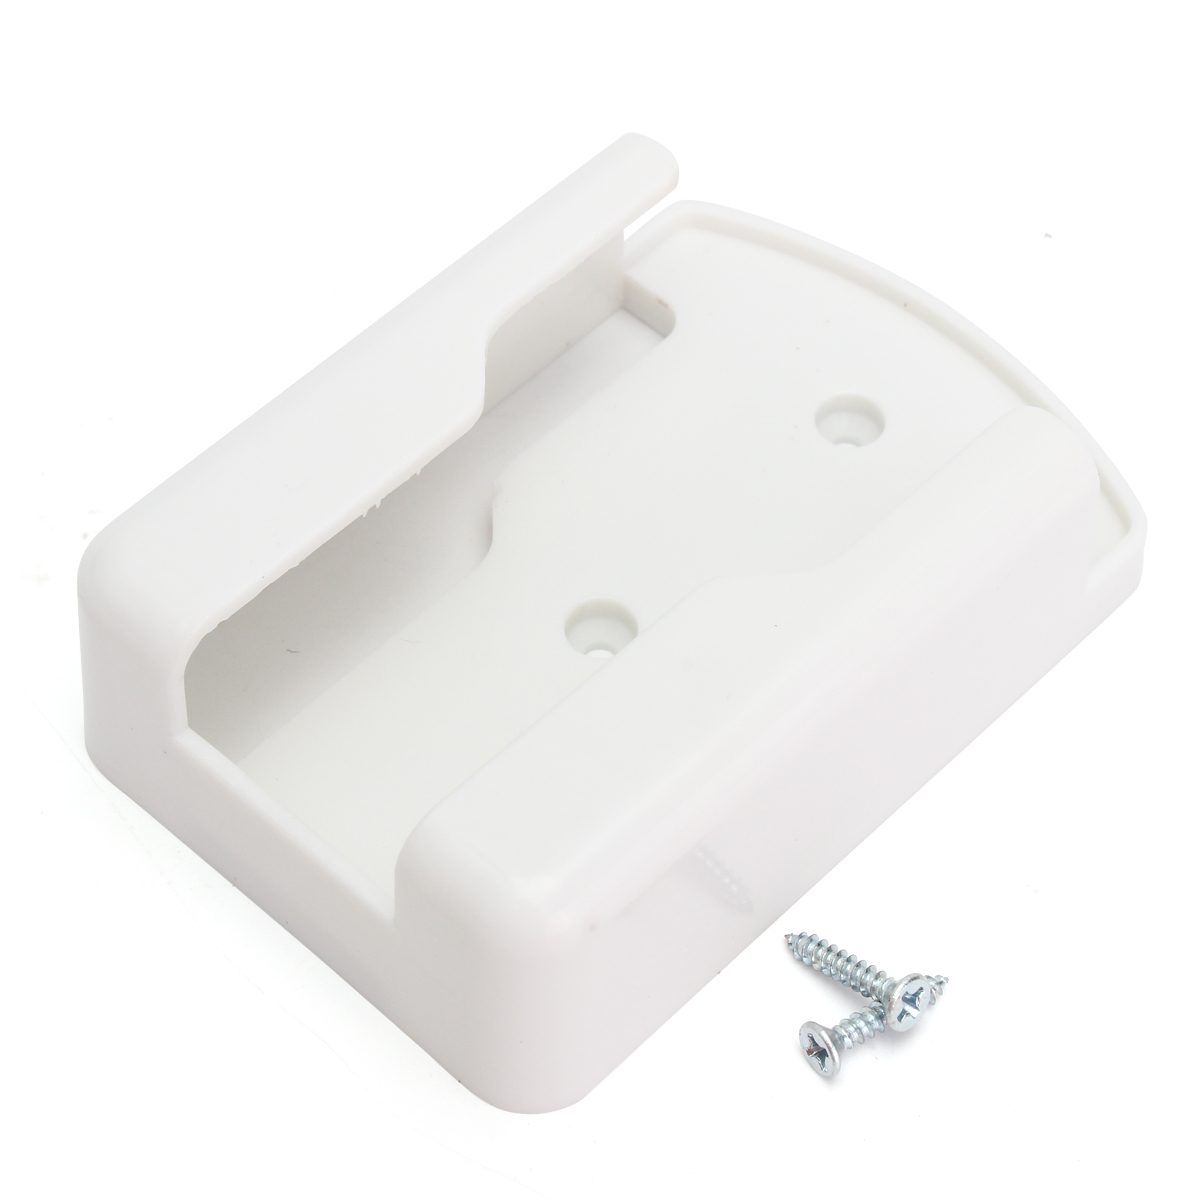 Universal-Air-Conditioner-Remote-Control-Holder-Wall-Mounted-Storage-Box-White-1130181-2